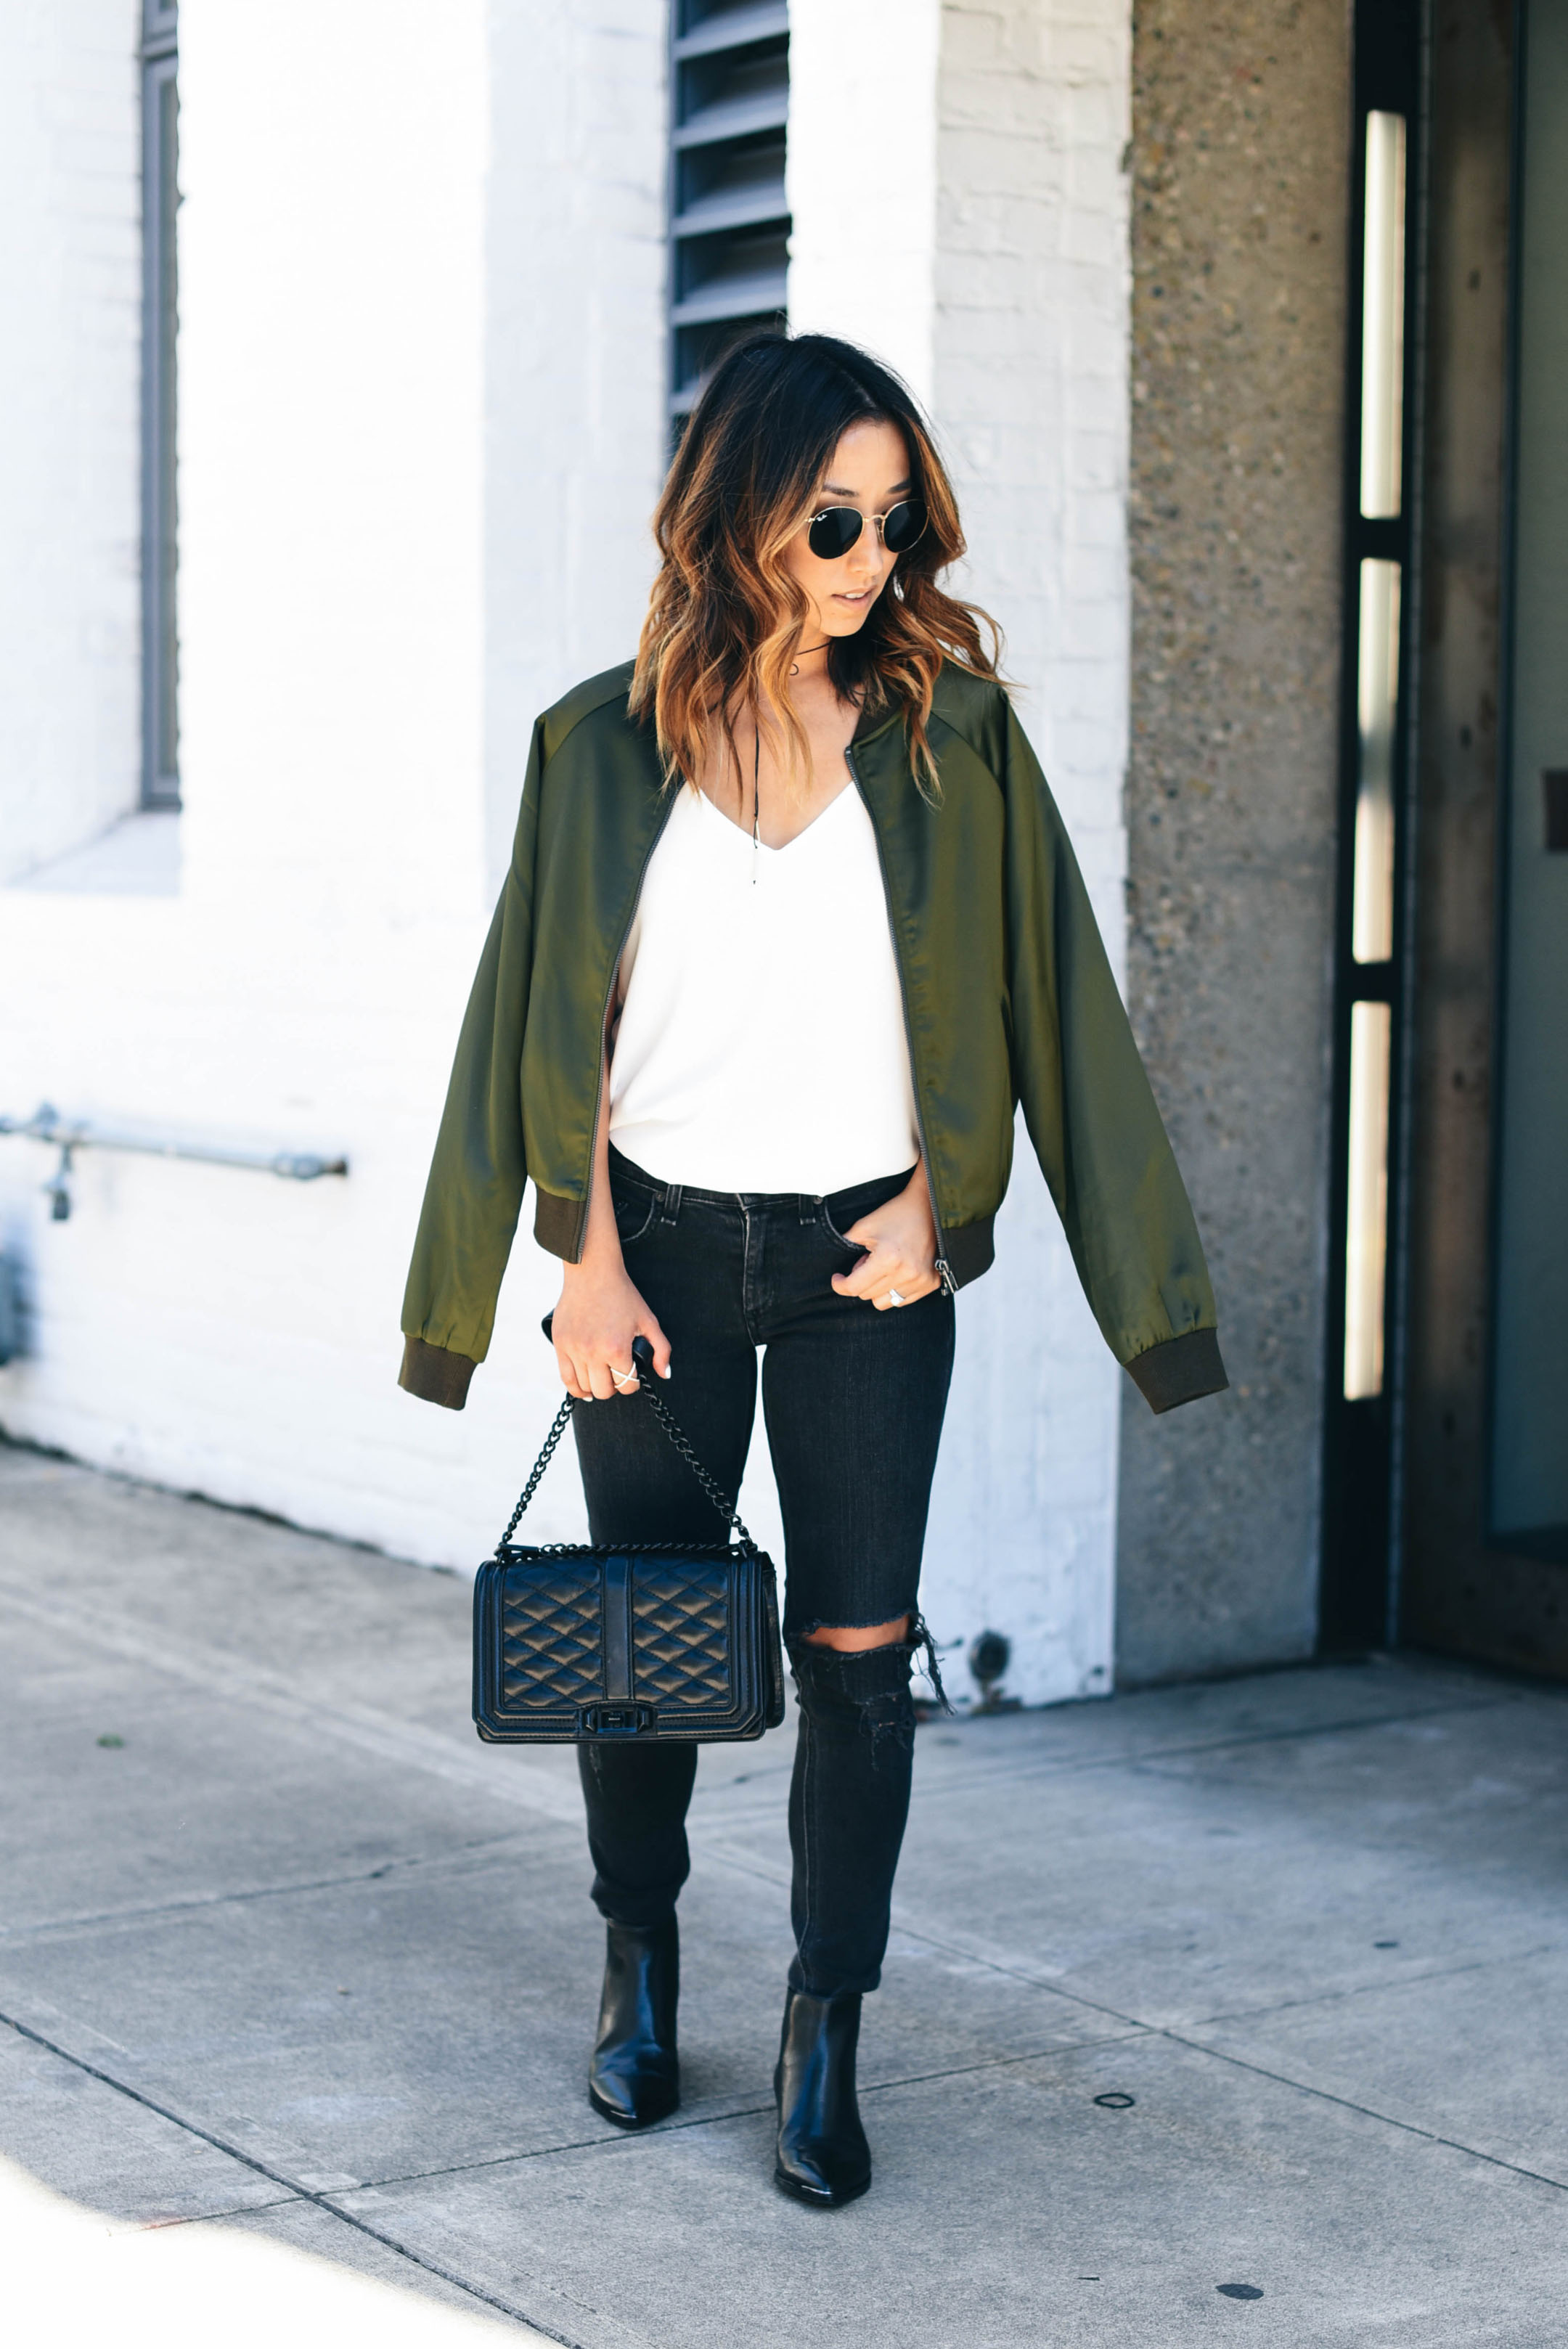 How to style a bomber jacket 2